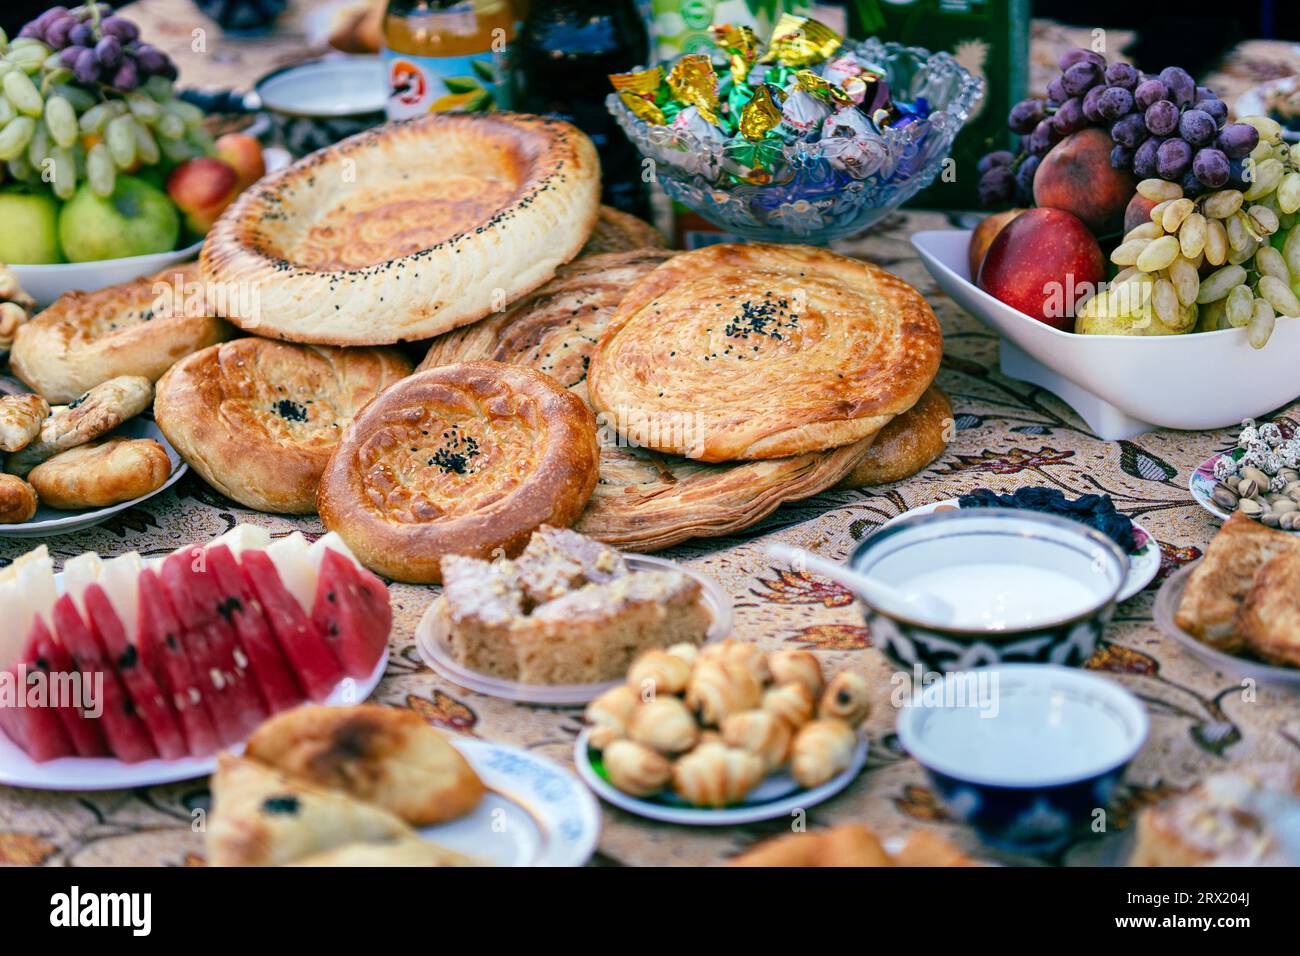 The traditional food in Central Asia with tests, food. The middle East. Oriental flavor. Uzbek national cuisine Stock Photo